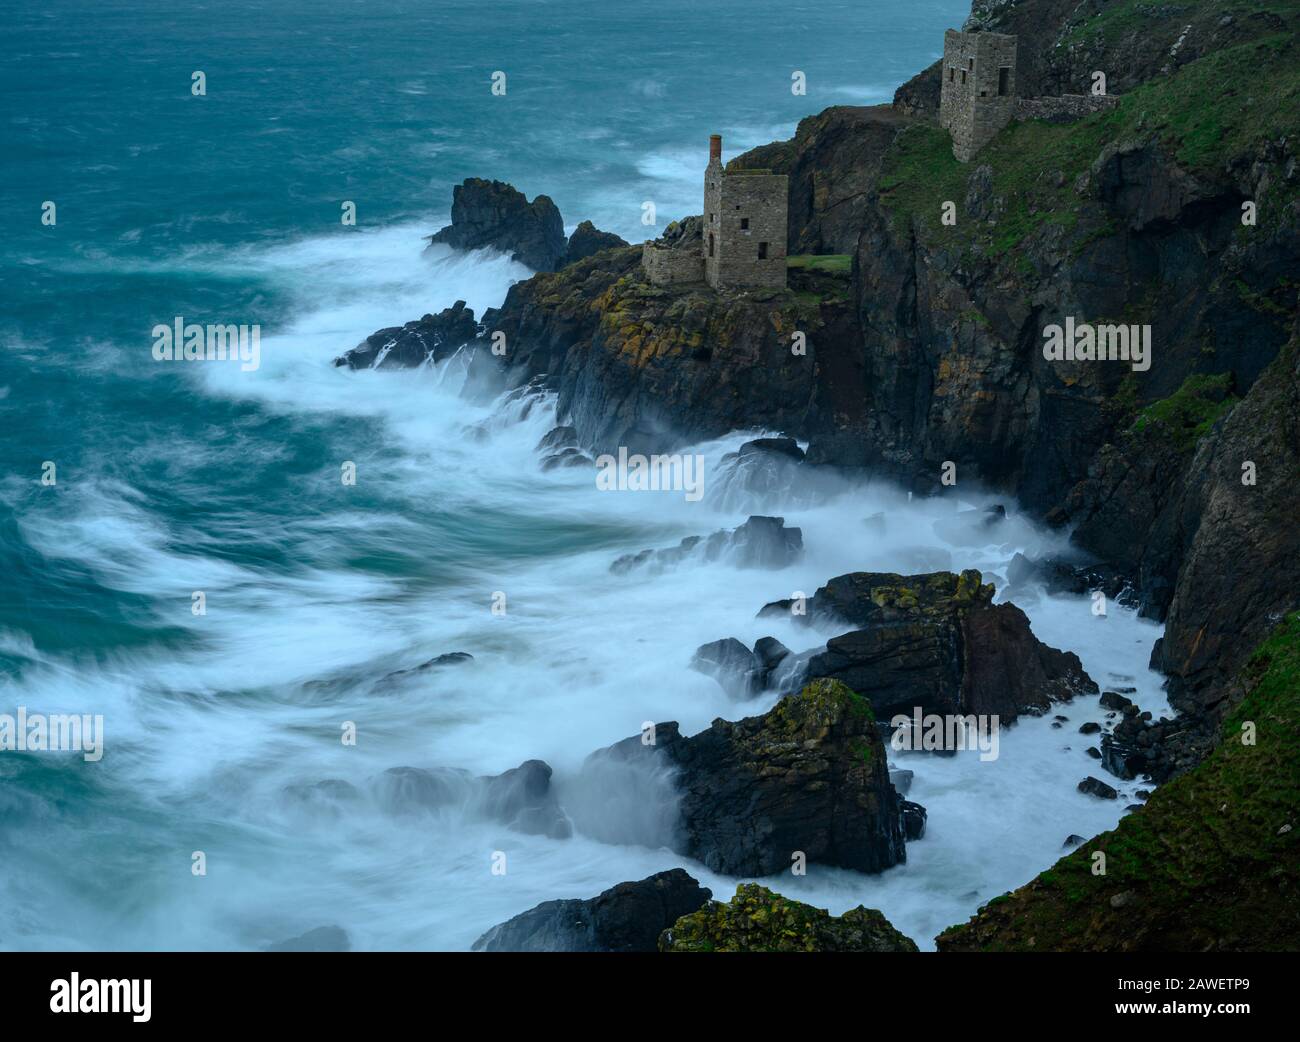 Botallack Mines, Cornwall, 8th February 2020. UK Weather: High winds hit the Cornish coastline bringing Atlantic waves crashing into the rocks at Botallak Mines near St Just, Cornwall on Saturday afternoon ahead of Storm Ciara. Severe weather warnings have been issued with 80 mph winds and heavy rain forecast when the full impact of the storm hits the UK tomorrow. Warnings of widespread travel disruption have been issued. Credit: Celia McMahon/Alamy Live News Stock Photo